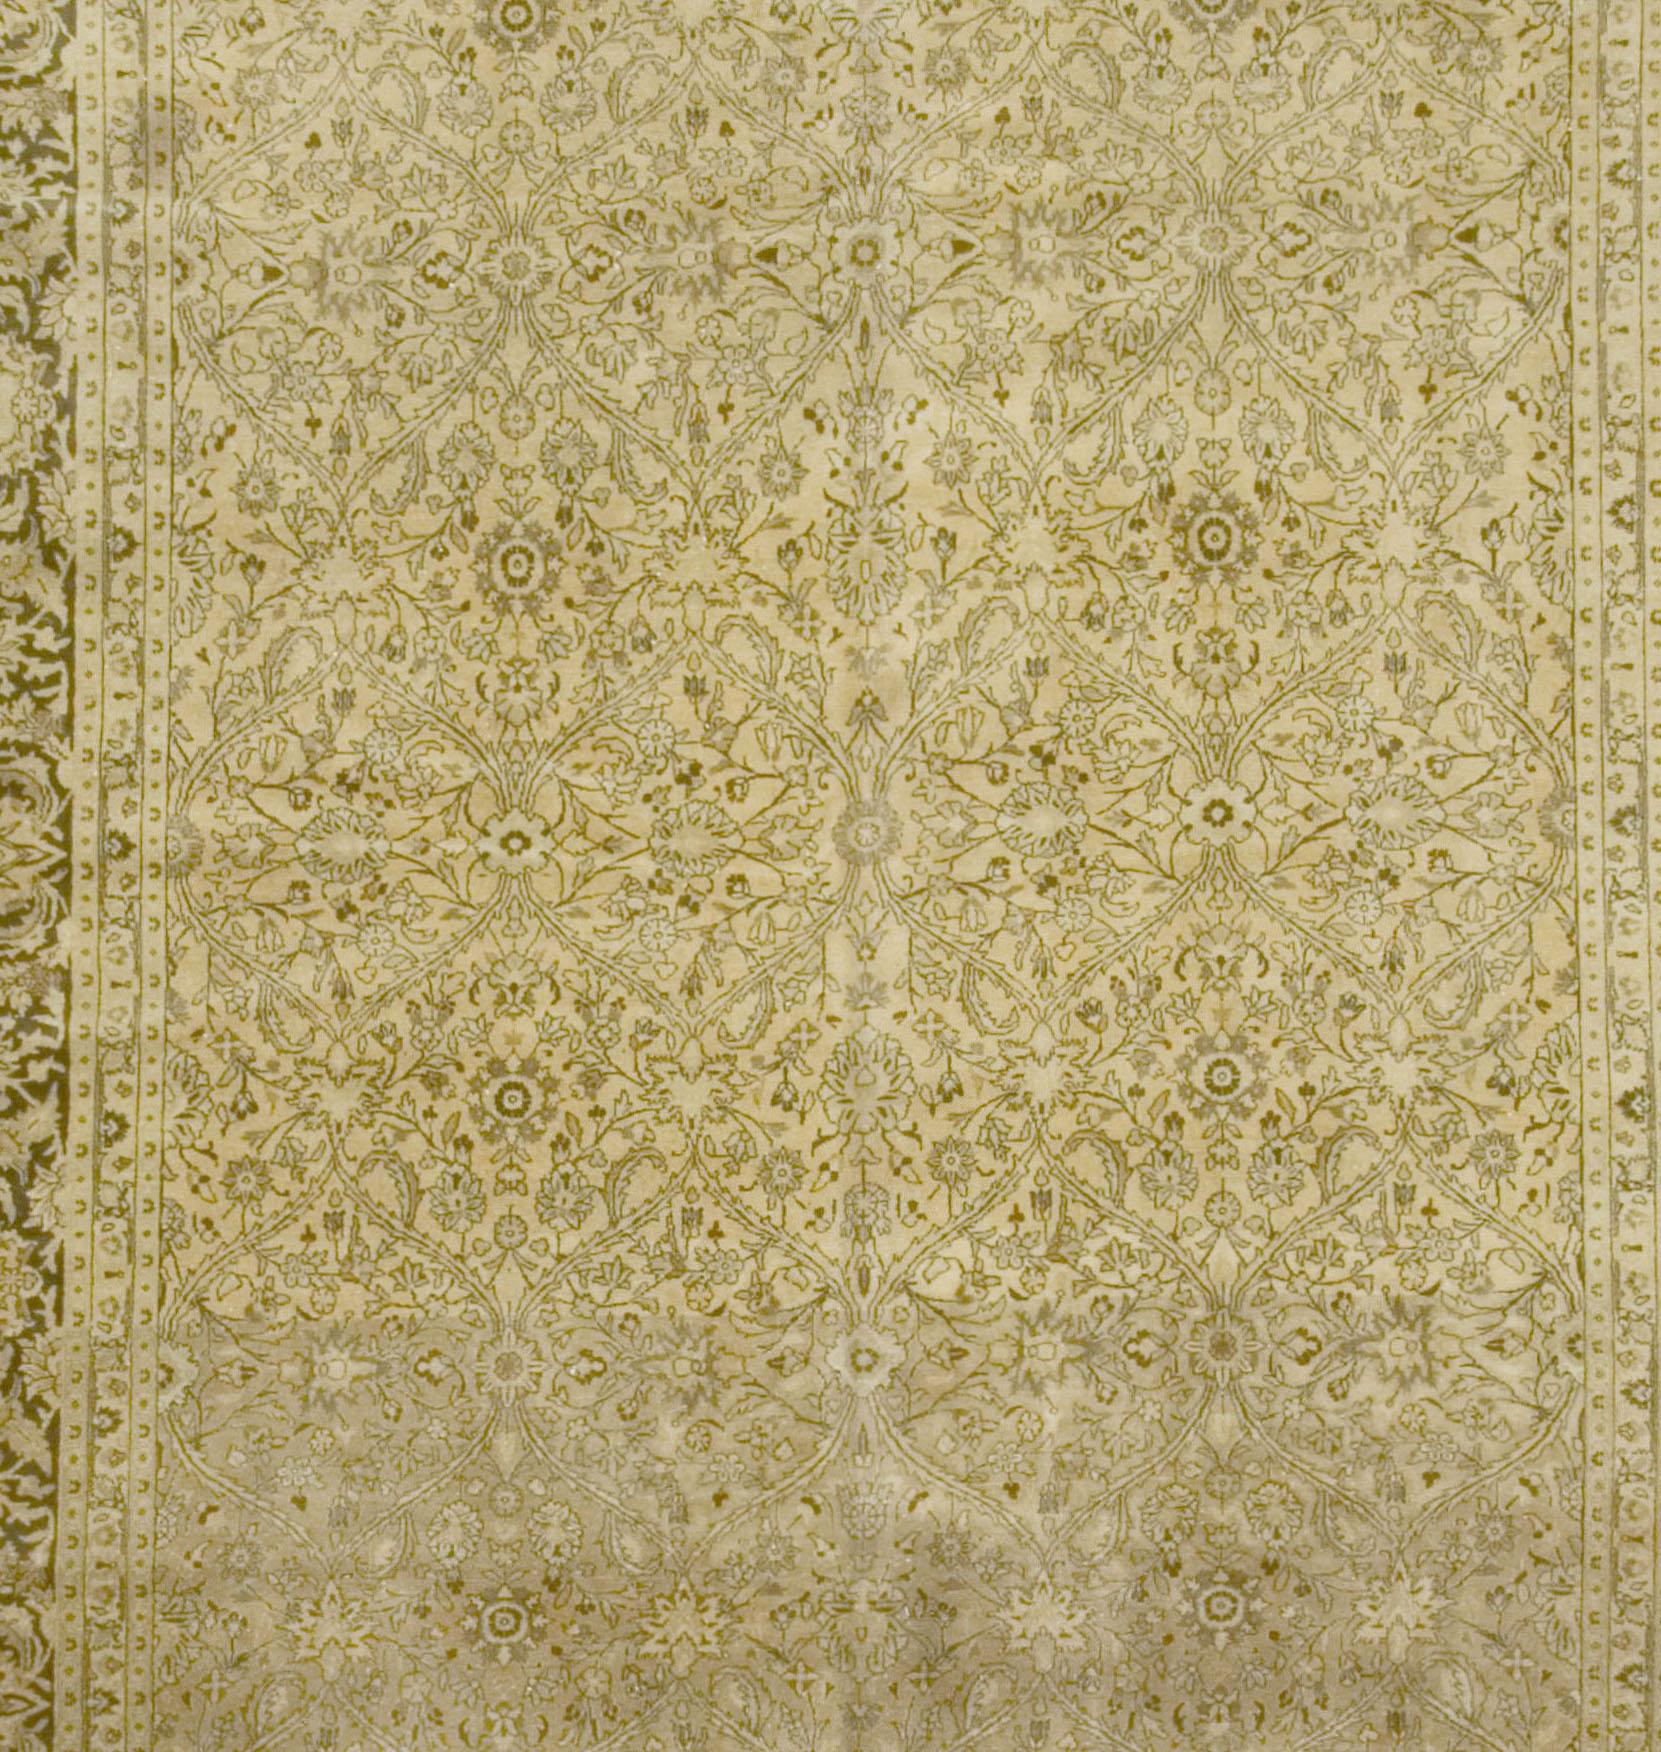 Antique Persian Meshad Rug, circa 1900, 9'7 x 13'2. Elegant curvilinear and floral patterns spread across the gold central field on this antique Meshad rug from Persia. A dark auburn border with creme botanical patterns surrounds the rug and